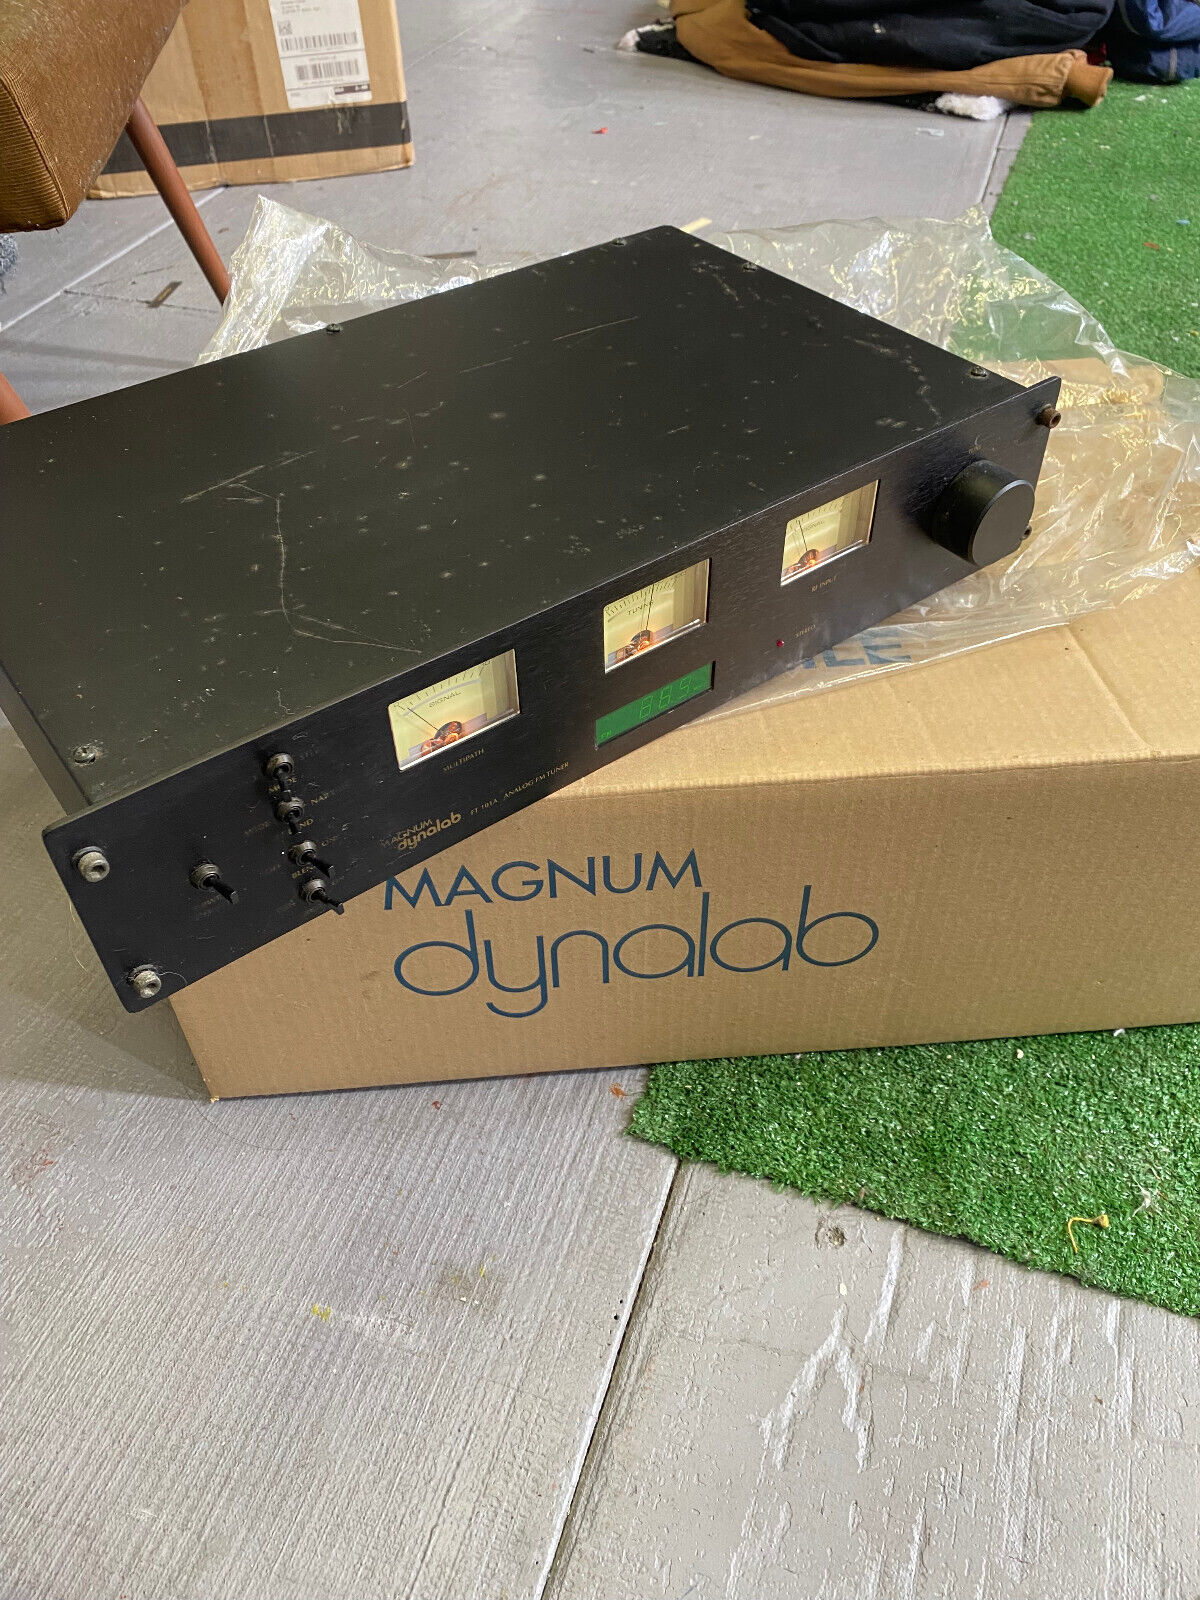 Magnum Dynalab FT-101A Audiophile Analog FM Band Tuner with Original box